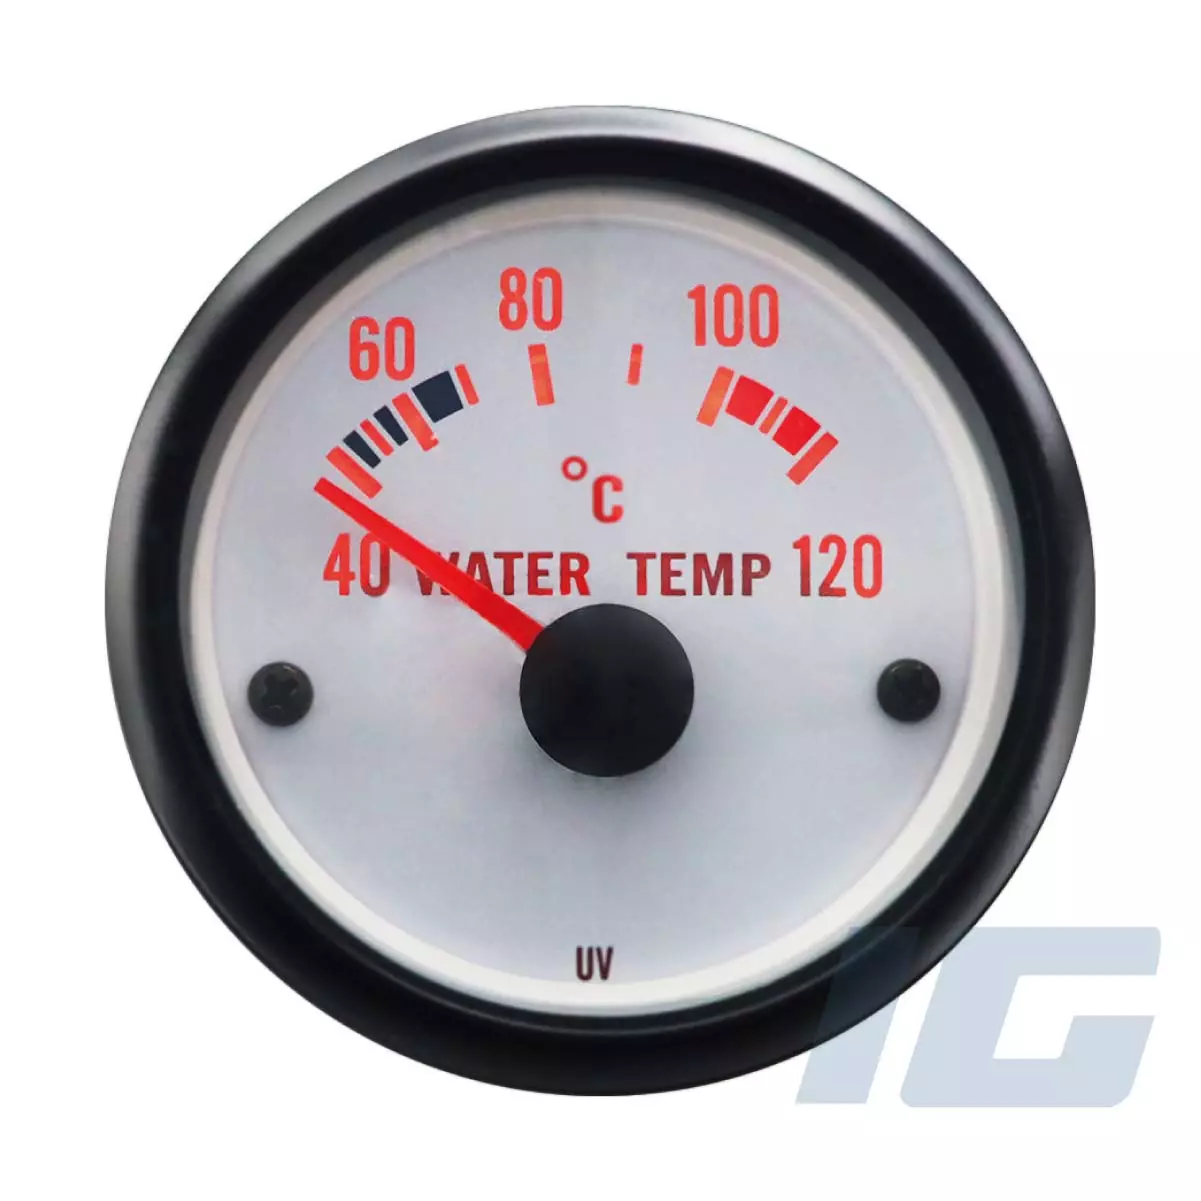 AFTERMARKET THERMOMETER COOLANT WATER TEMPERATURE GAUGE FOR CARS WITH TEMP PROBE SENSOR KIT Aftermarket Gauges: Car, Truck, Digital, Automobile, Replacement